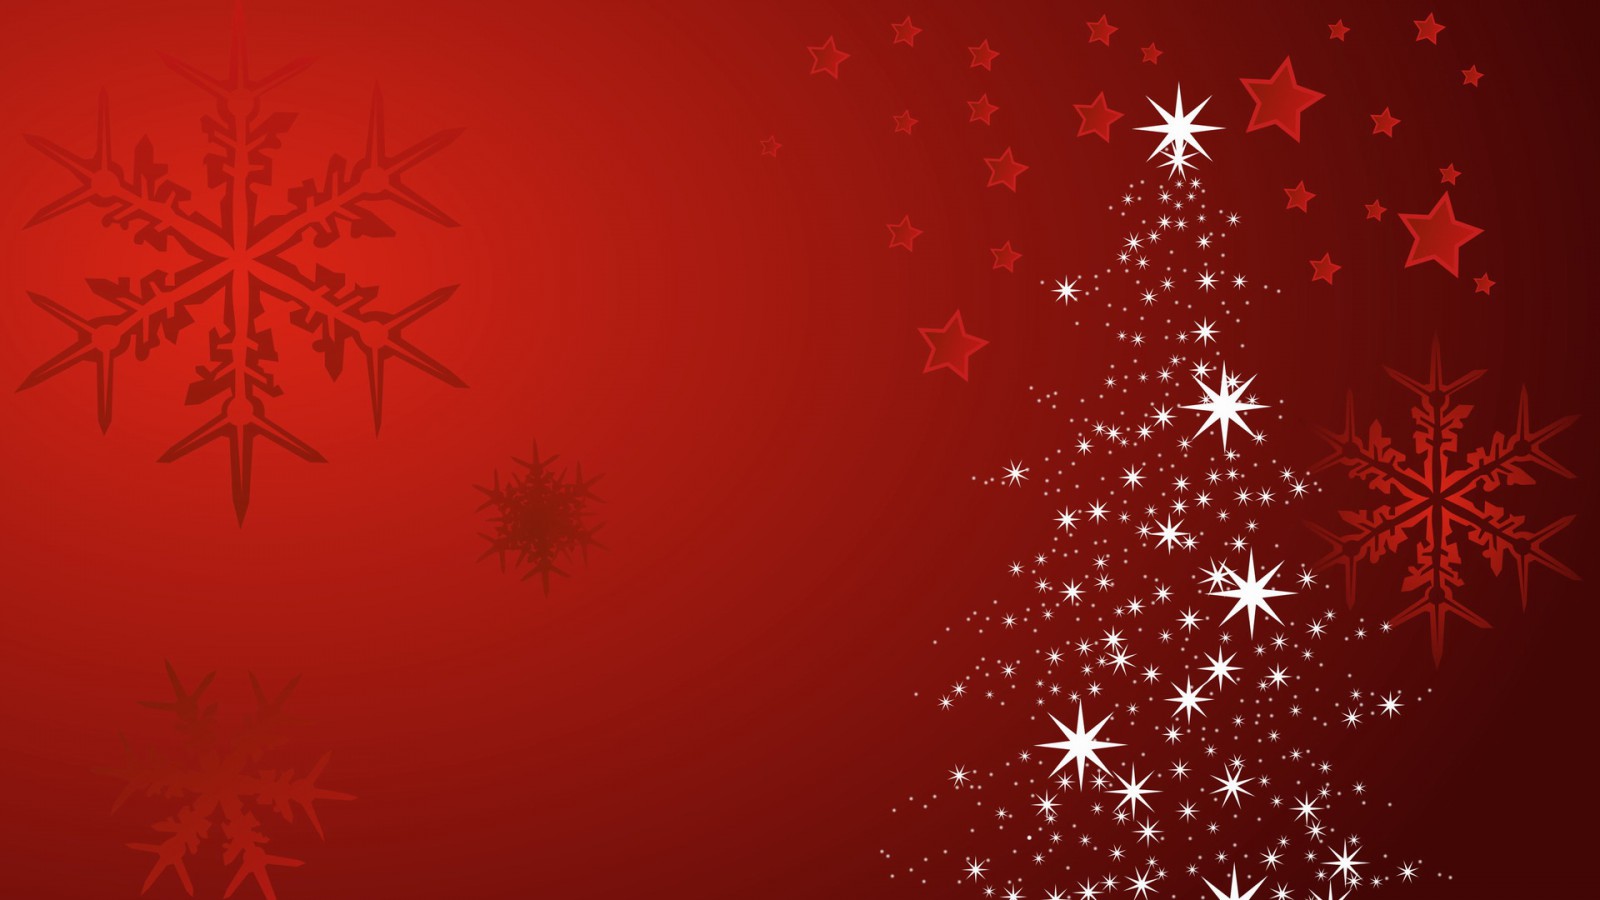 packard bell wallpaper,red,snowflake,pattern,christmas decoration,christmas eve